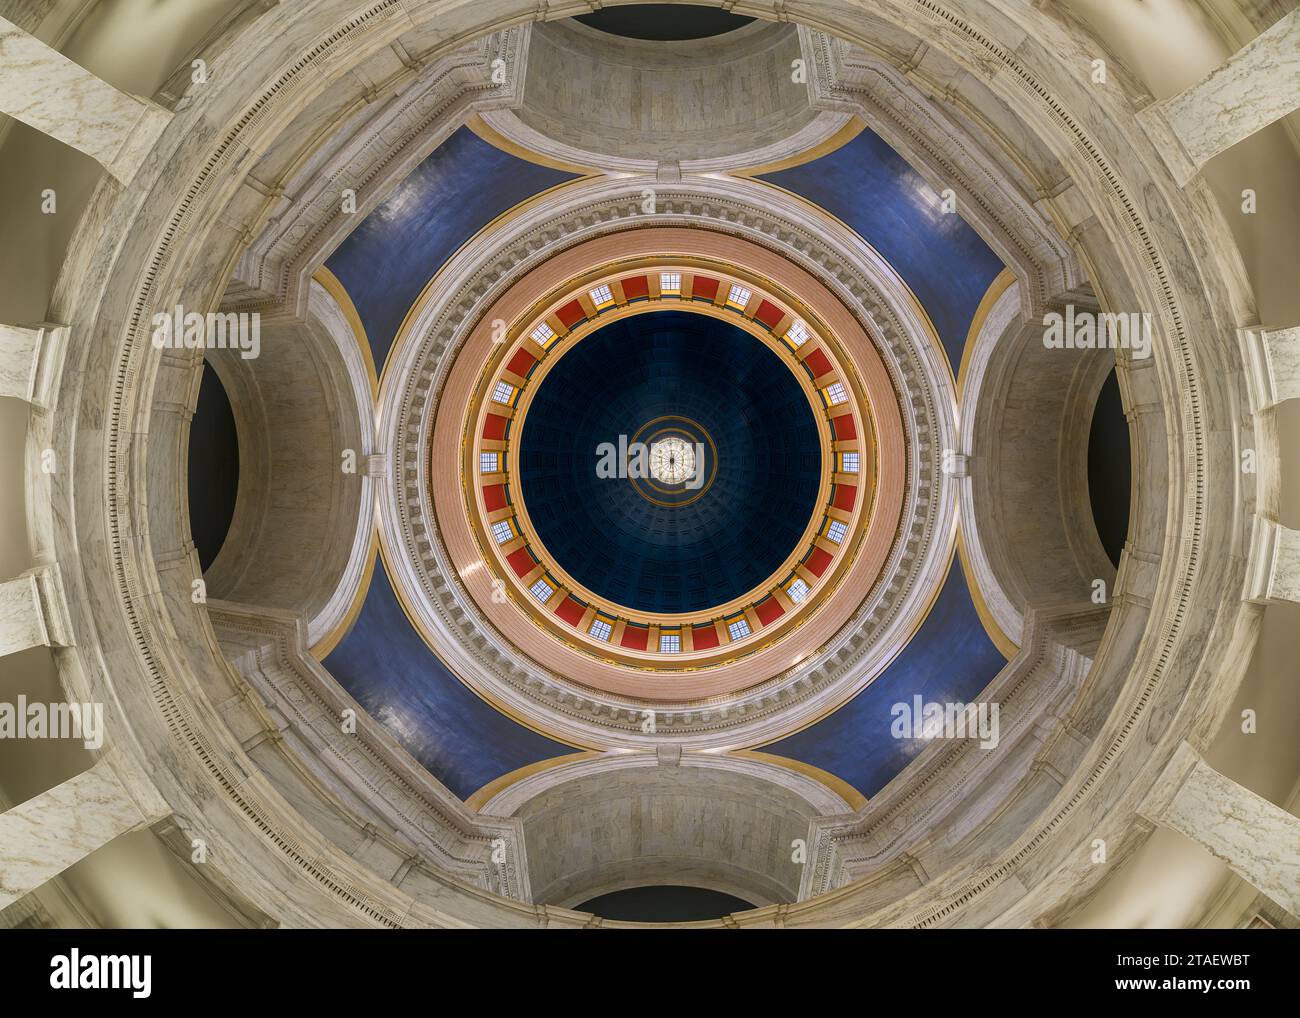 Inner dome from the rotunda floor of the West Virginia State Capitol building at 1900 Kanawha Blvd E in Charleston, West Virginia Stock Photo